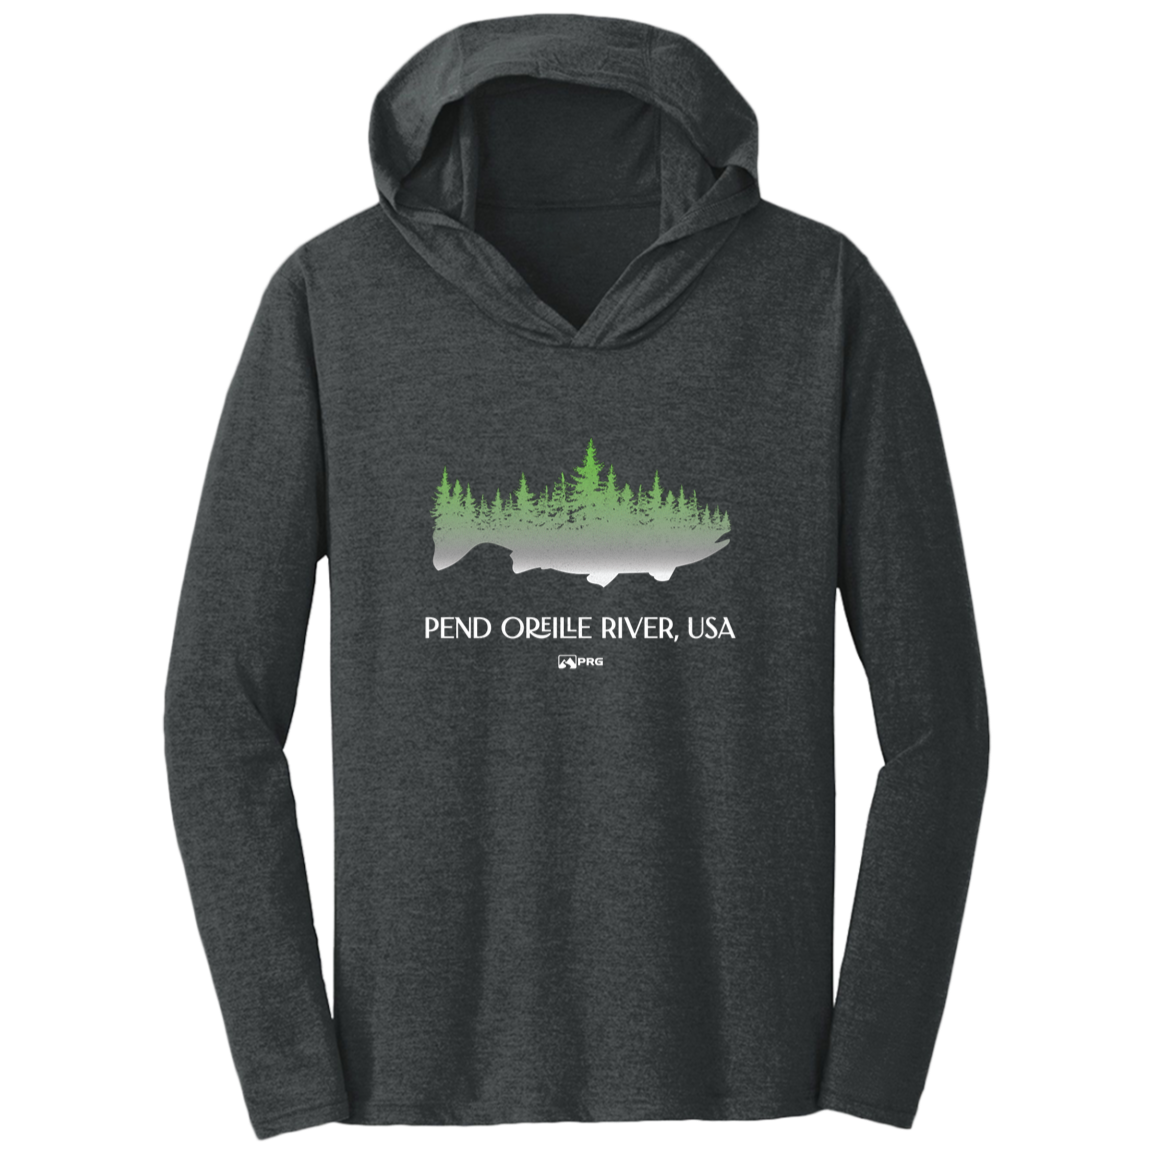 Forests & Fish - Shirt Hoodie